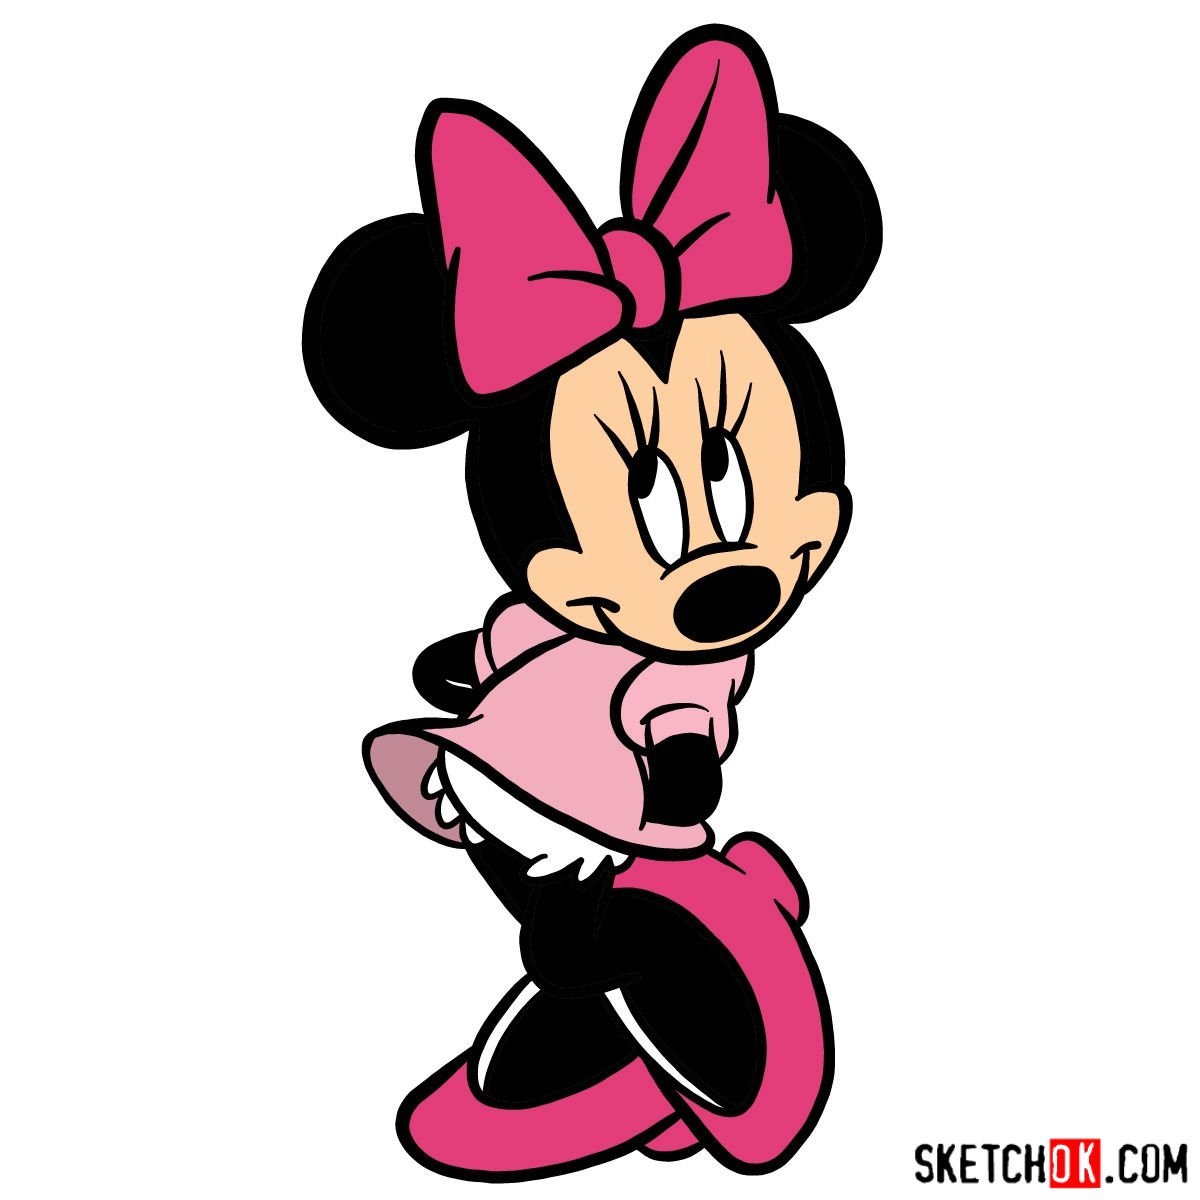 How to Draw Chibi Minnie Mouse - DrawingNow